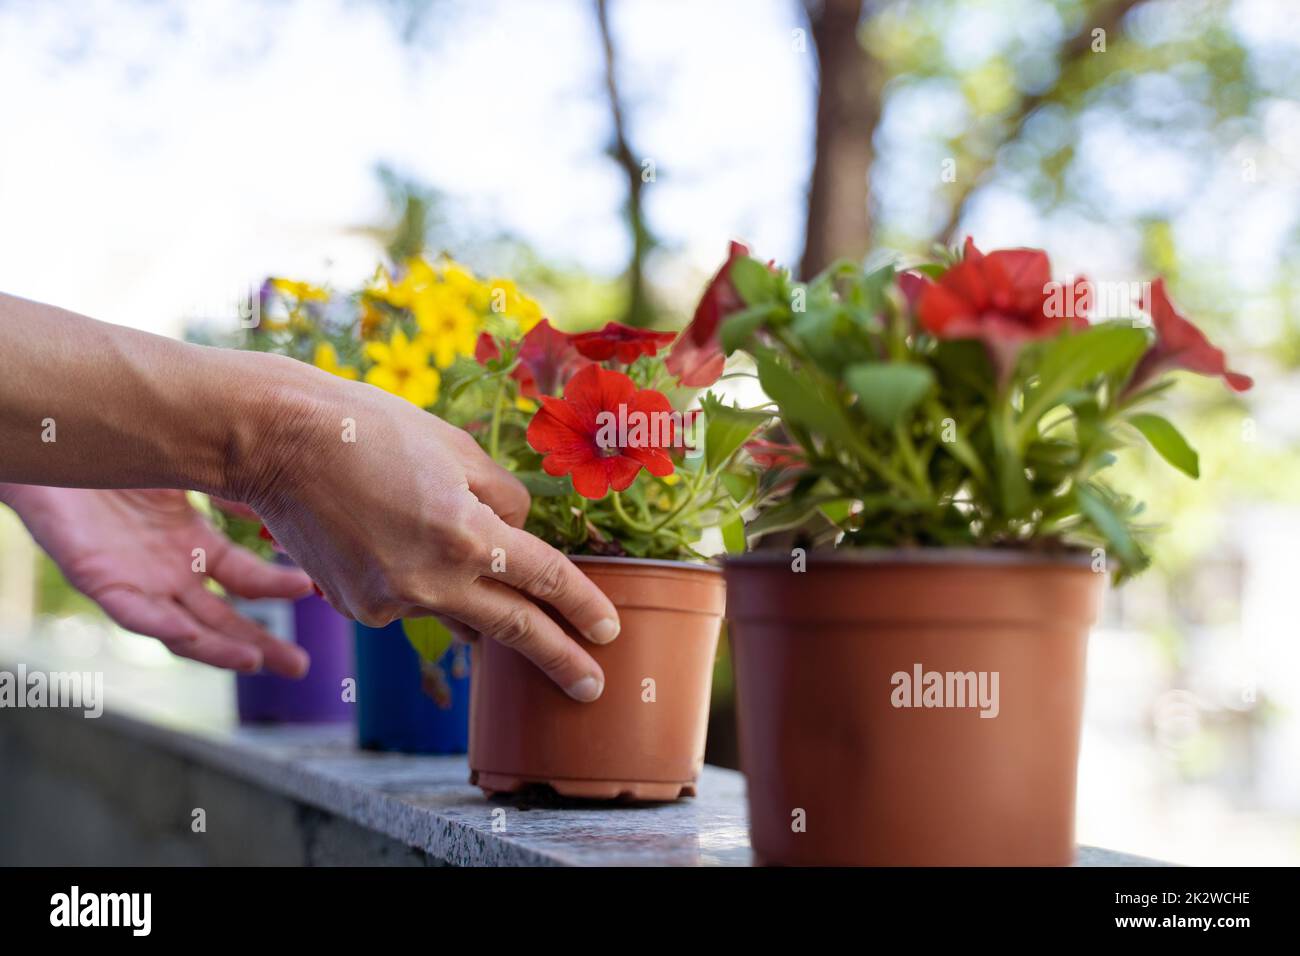 woman hands arranging flower pots on the balcony Stock Photo